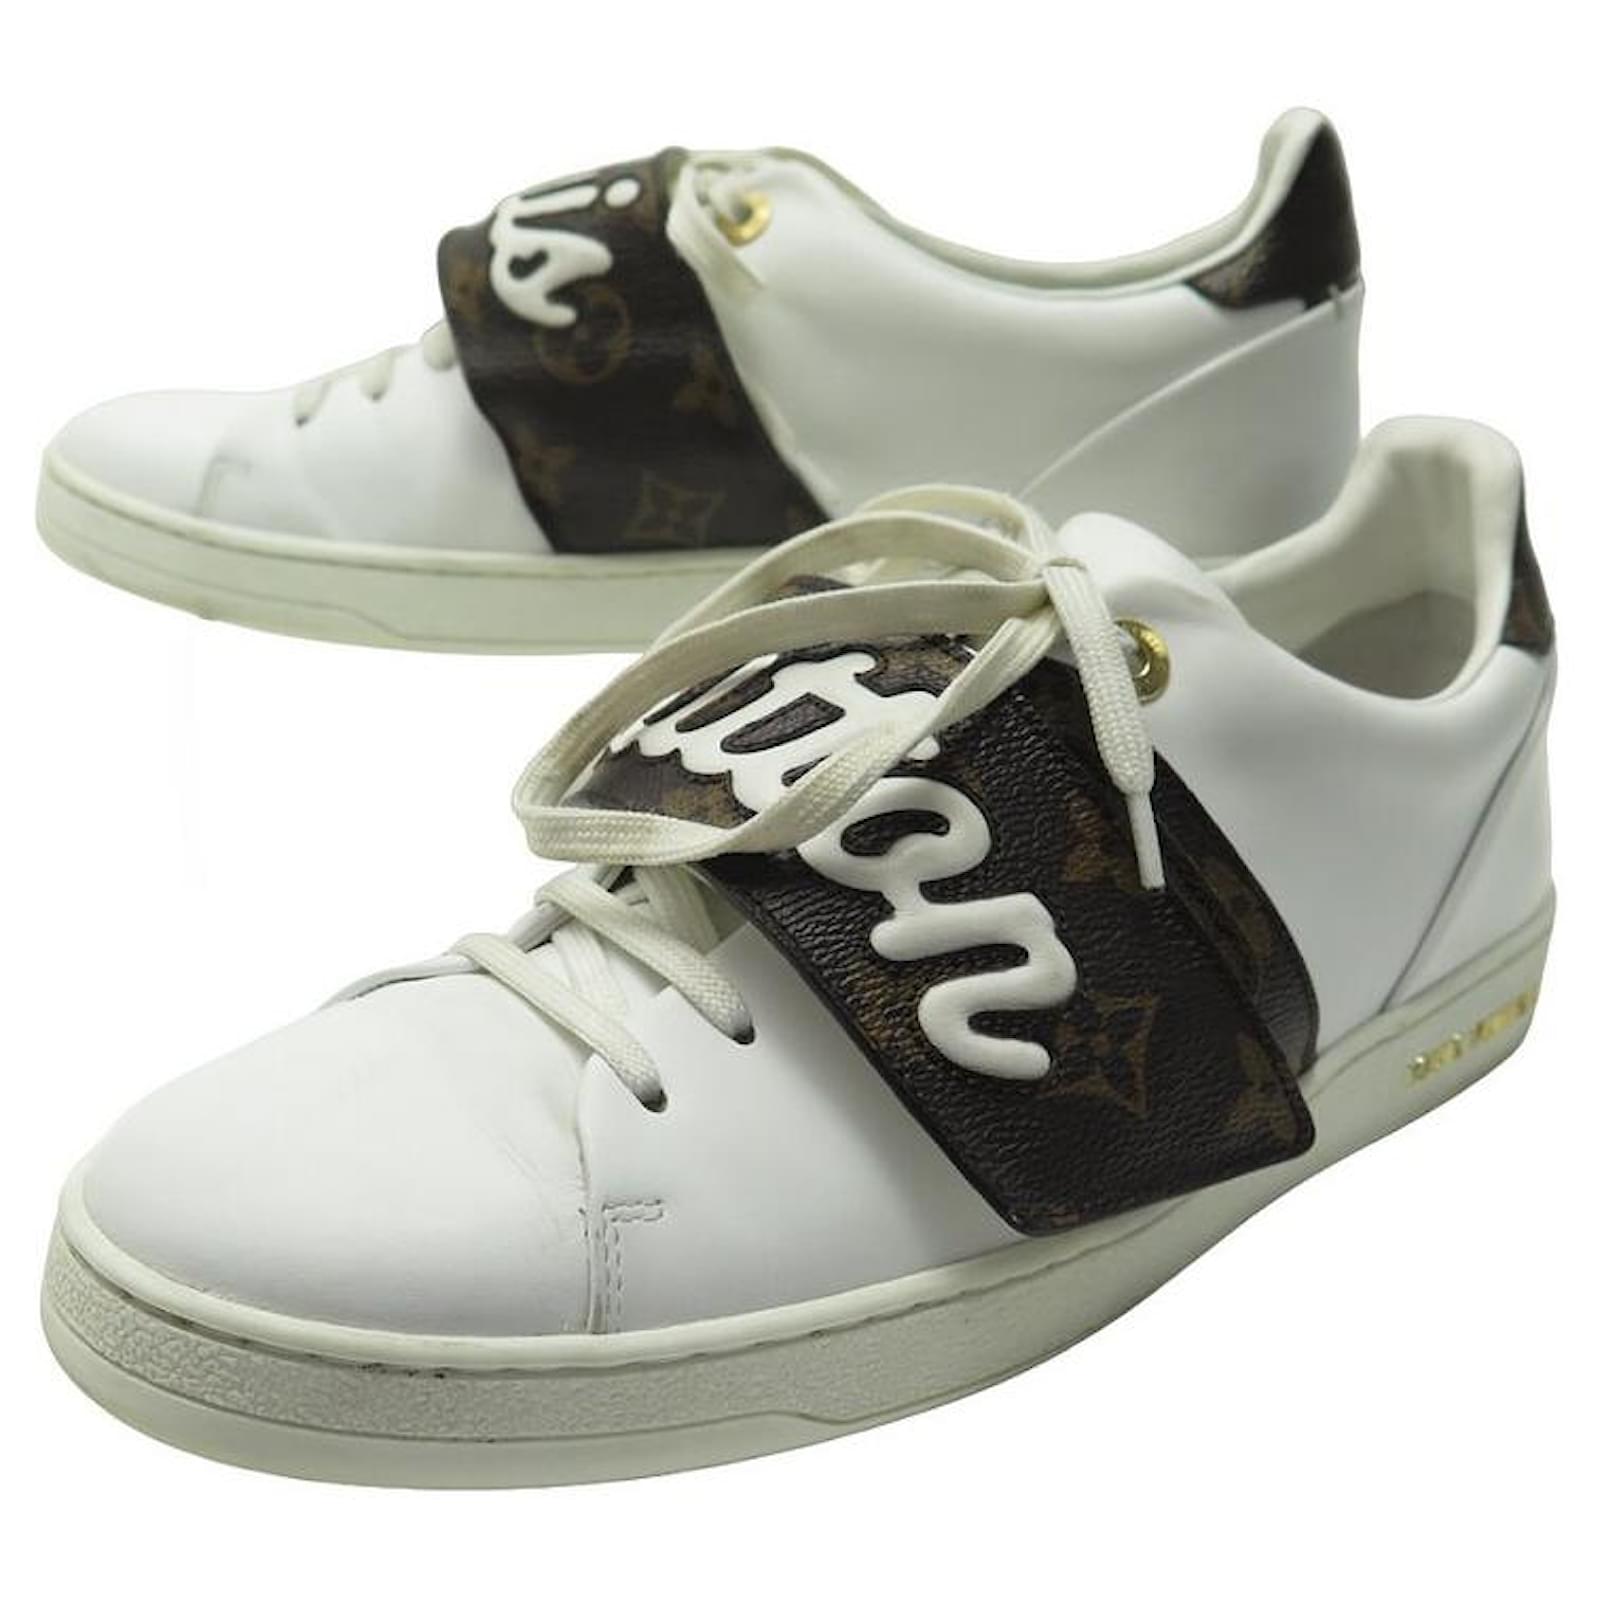 LOUIS VUITTON SHOES FRONTROW SNEAKERS 1a3T9Z 38.5 SNEAKERS SHOES